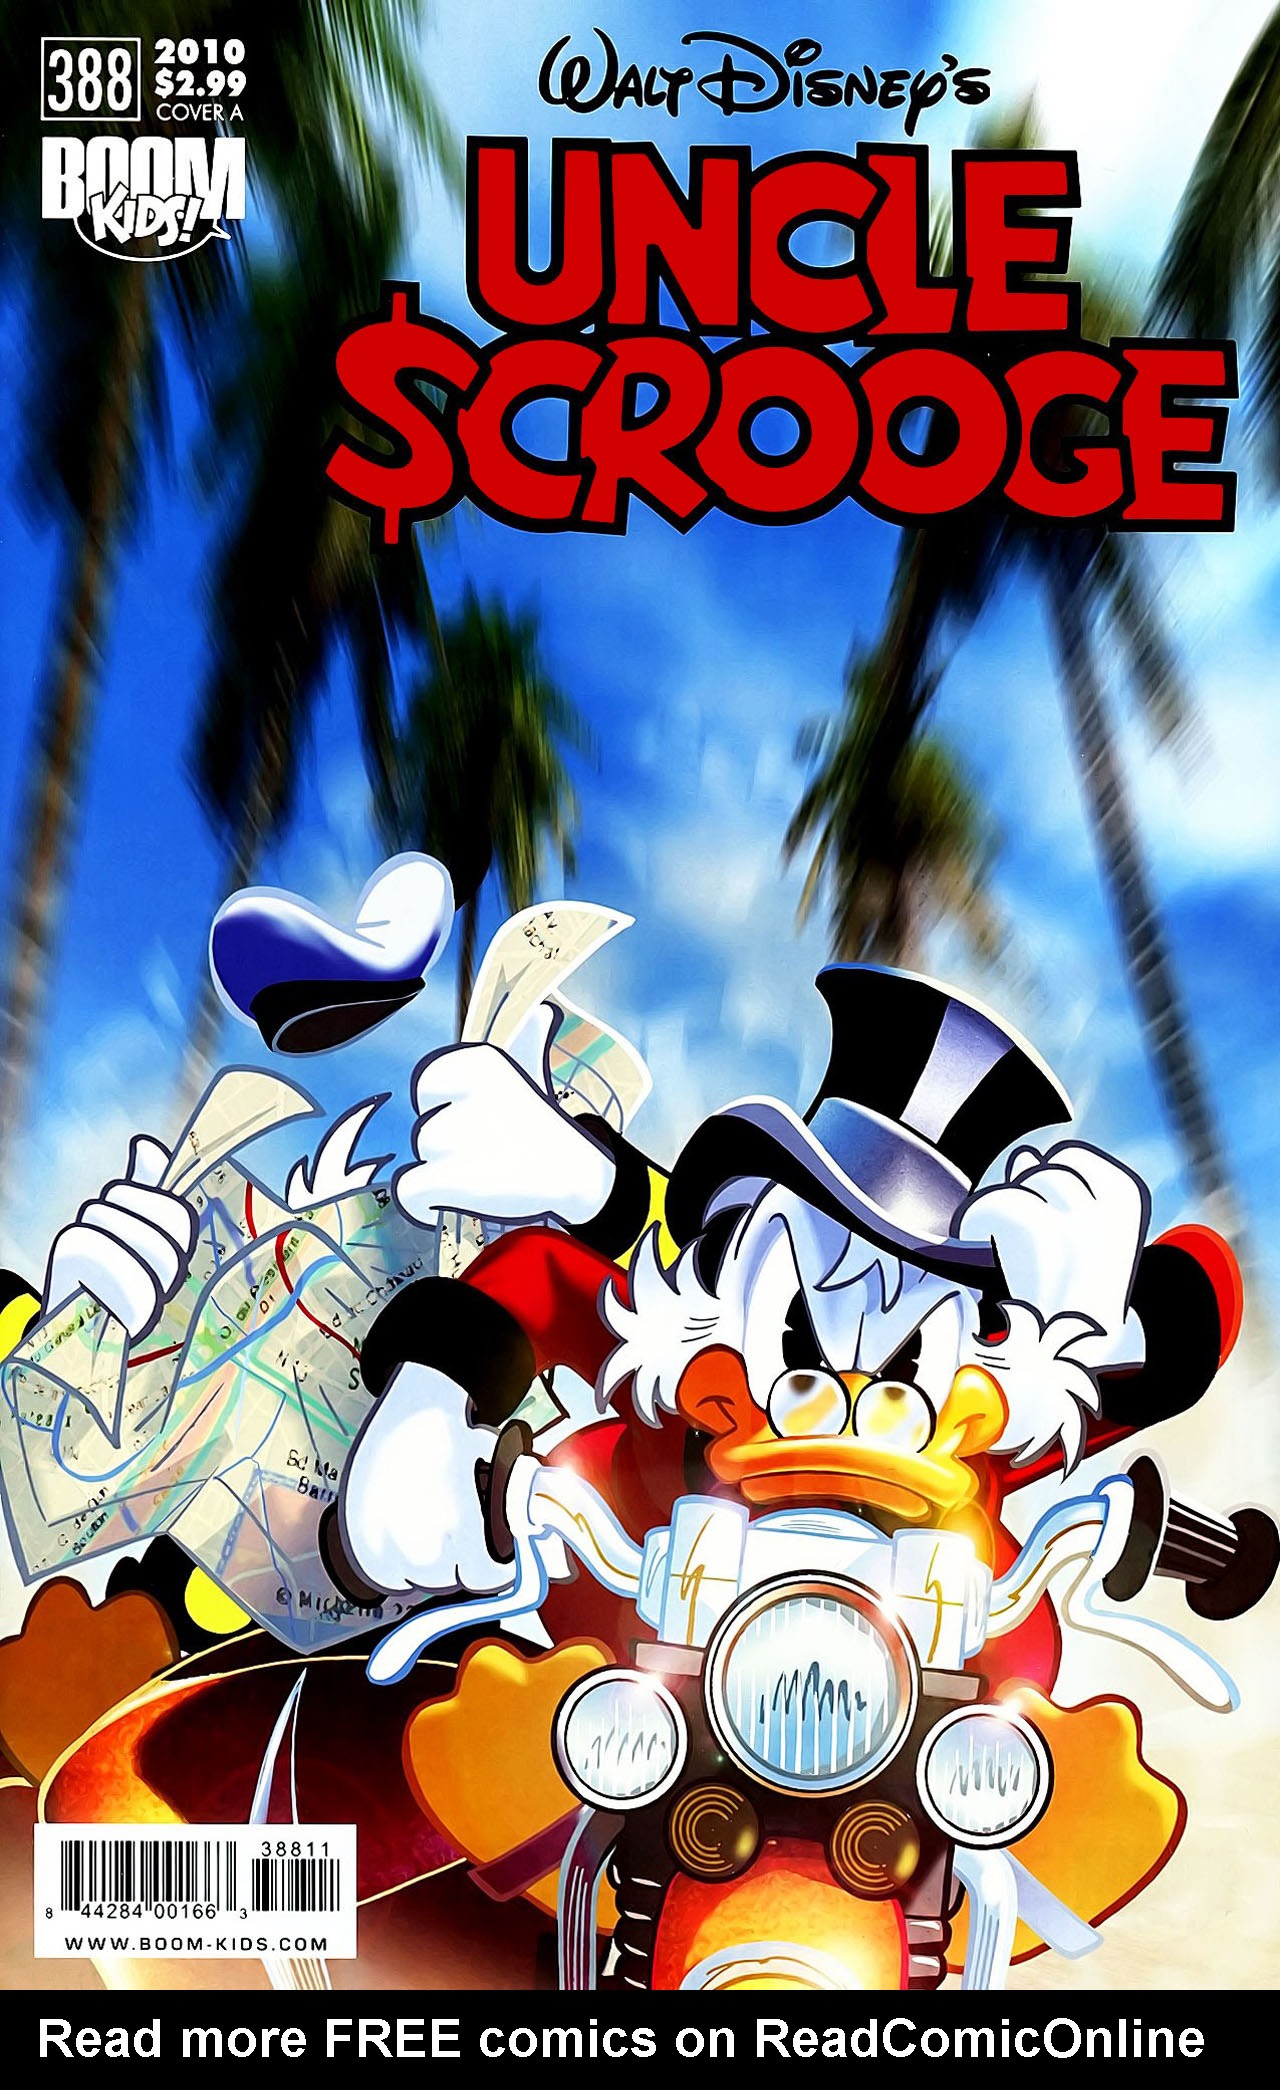 Read online Uncle Scrooge (2009) comic -  Issue #388 - 1